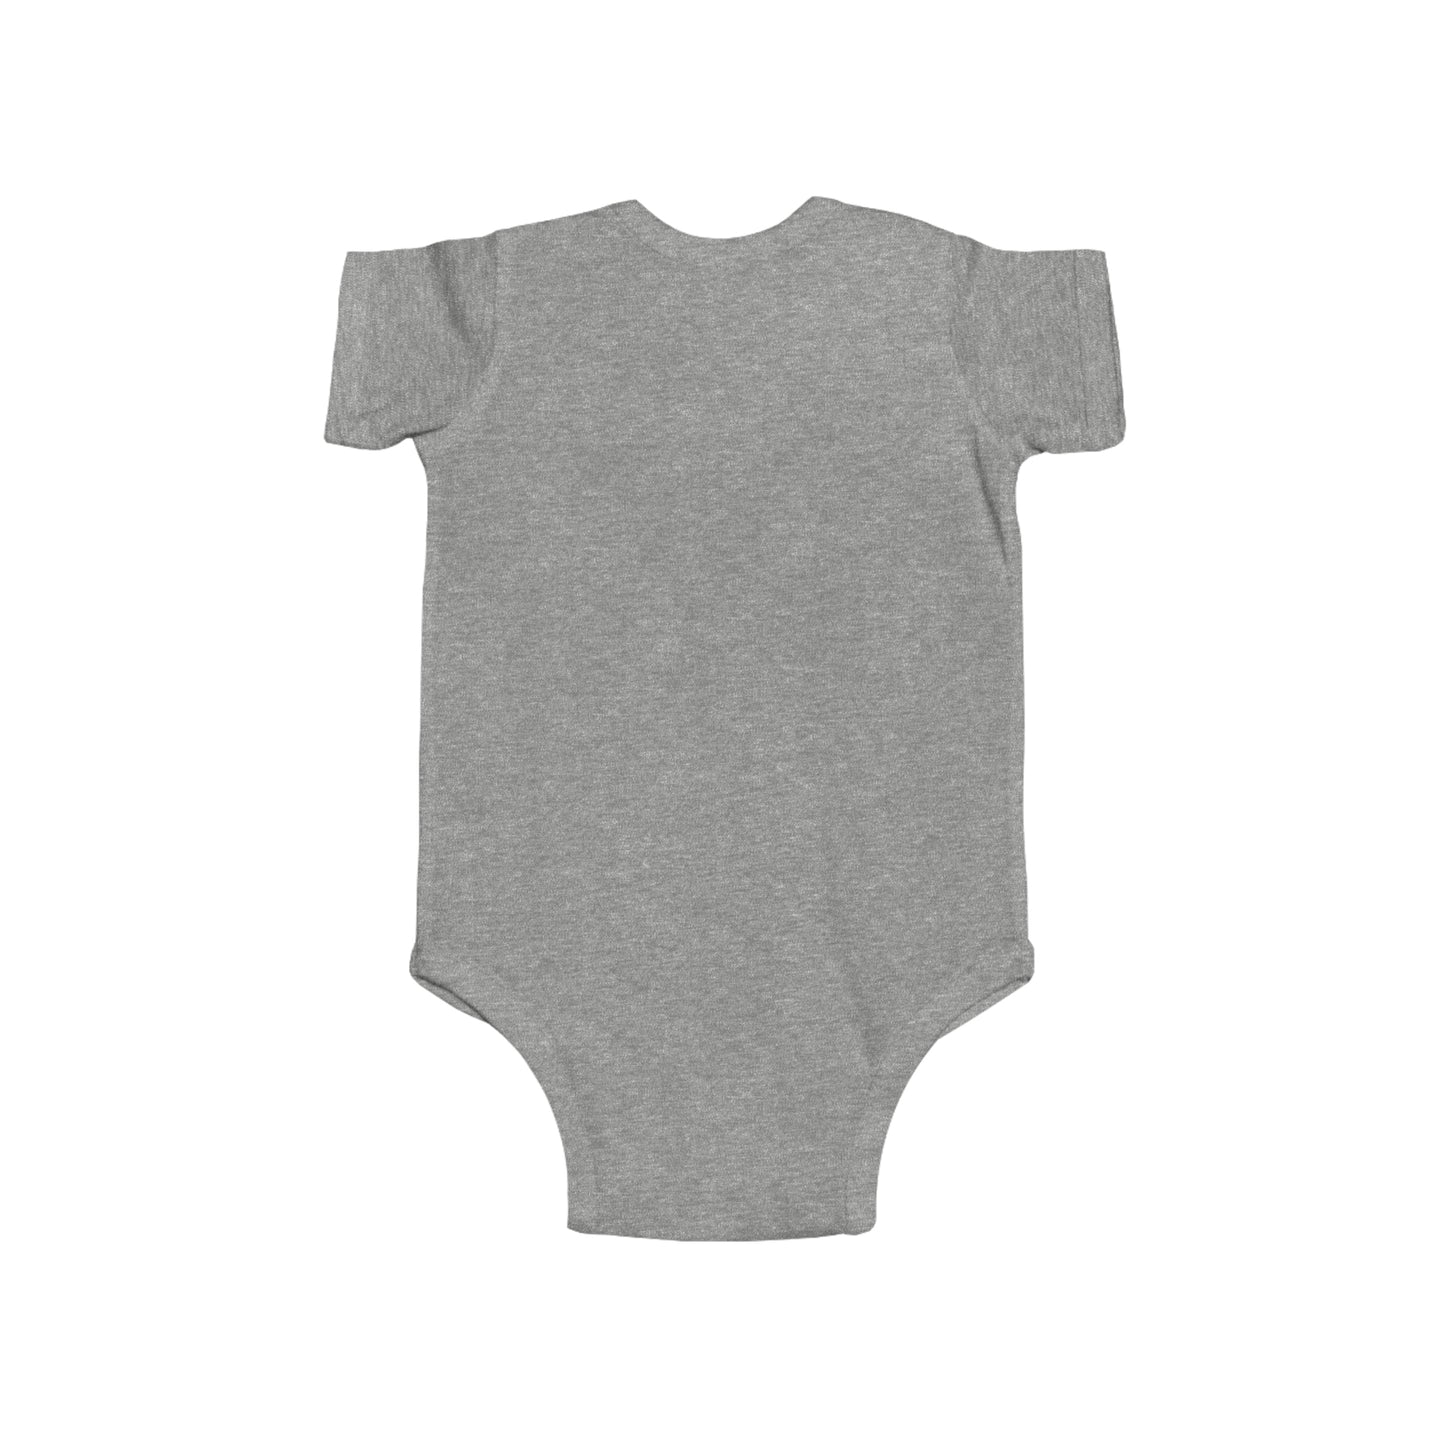 Witches Be Trippin - Halloween - Infant Fine Jersey Bodysuit